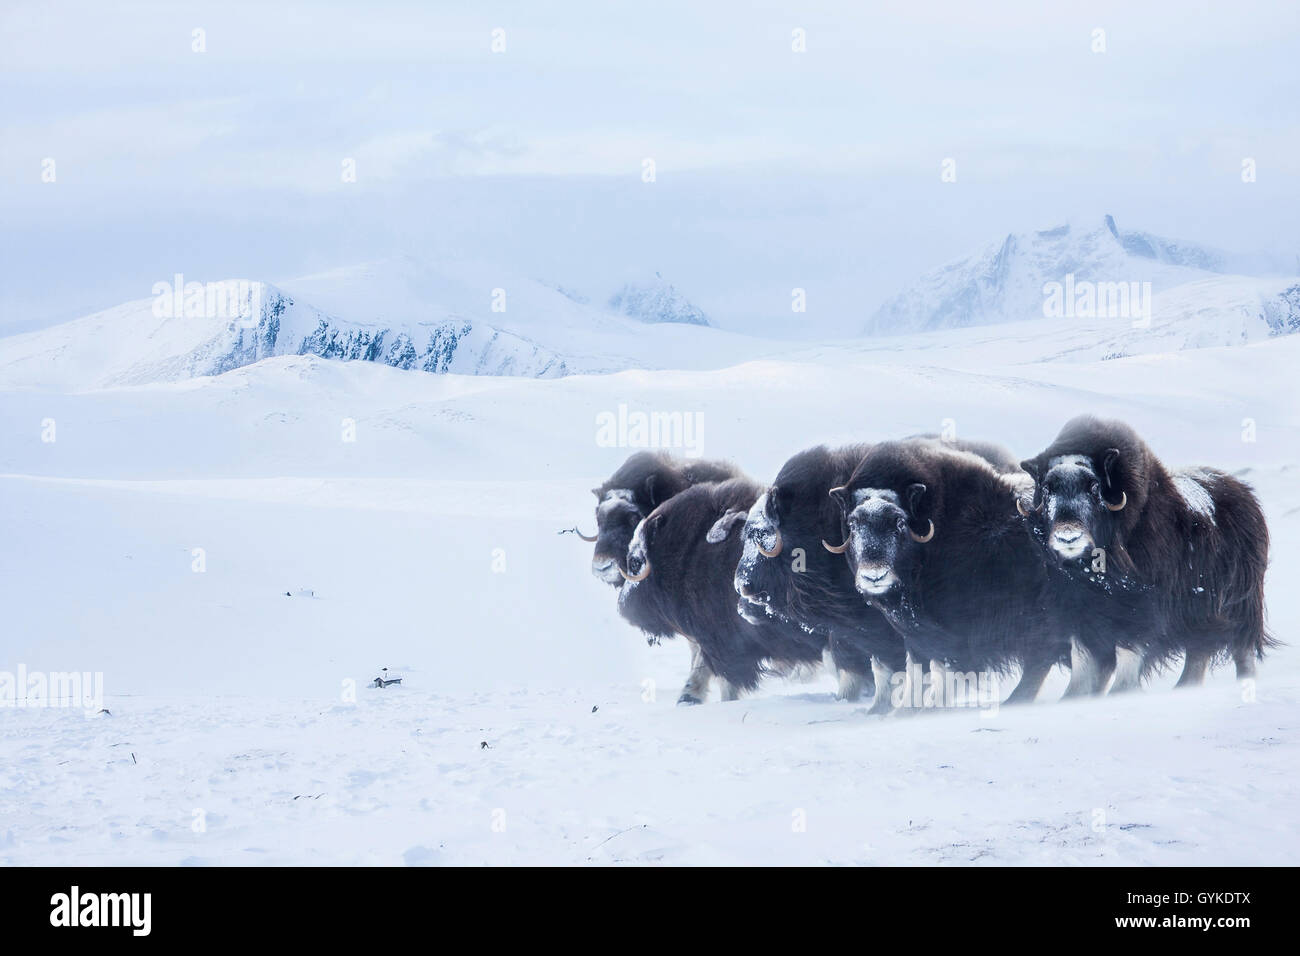 Muskox (Ovibos moschatus), small herd in winter with ice covered faces, Norway, Dovrefjell Sunndalsfjella National Park Stock Photo